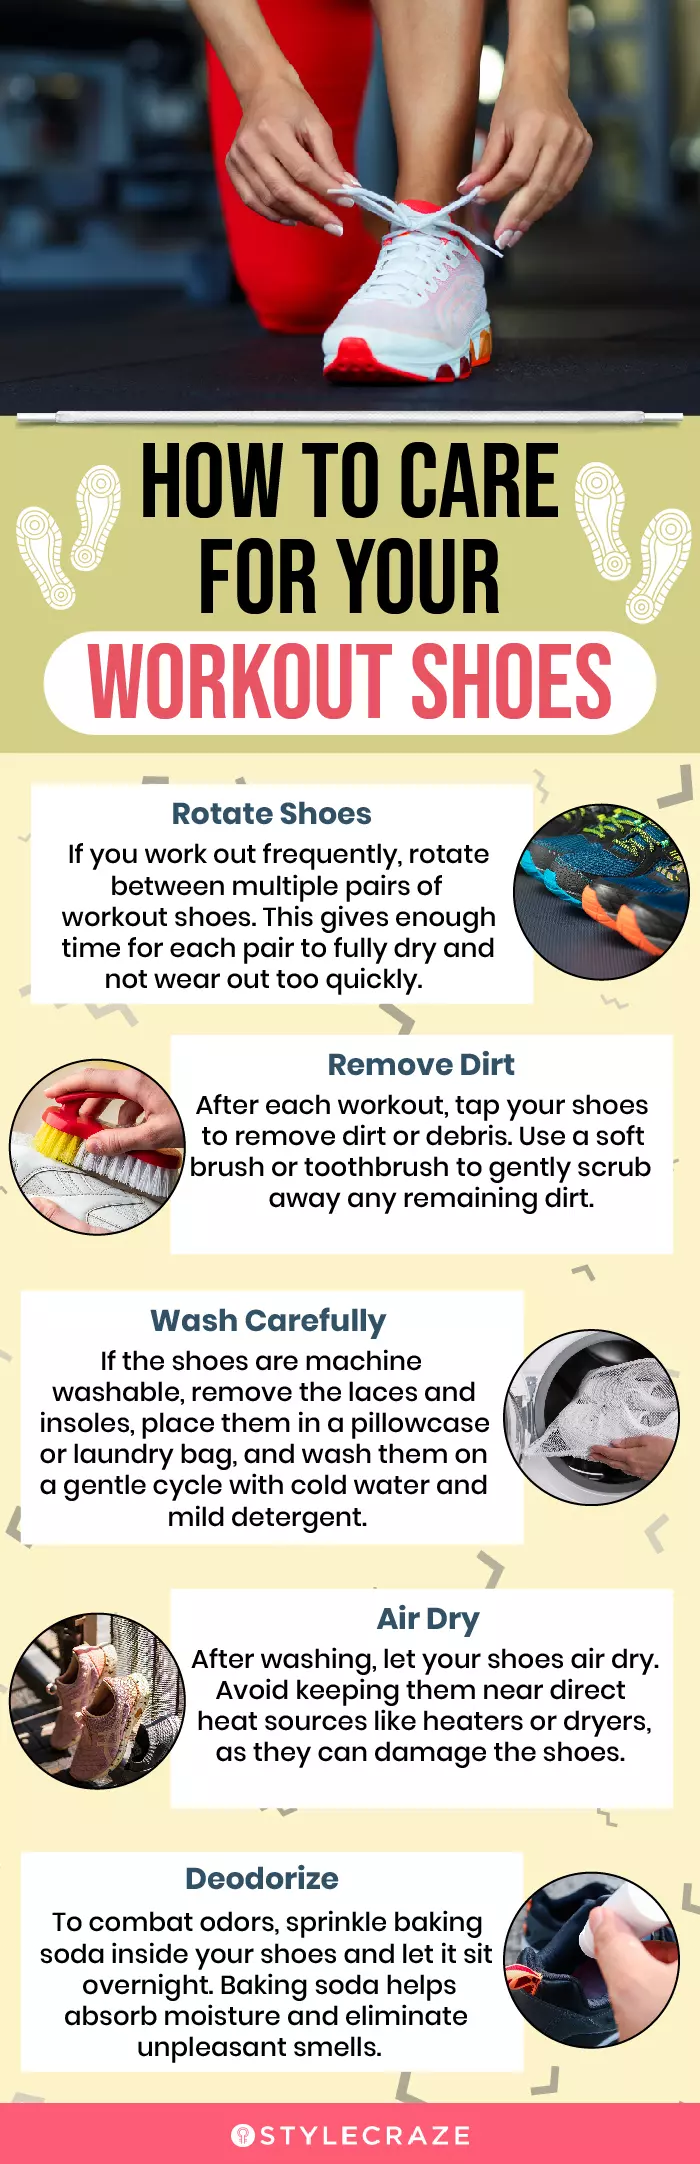 How To Care For Your Workout Shoes (infographic)